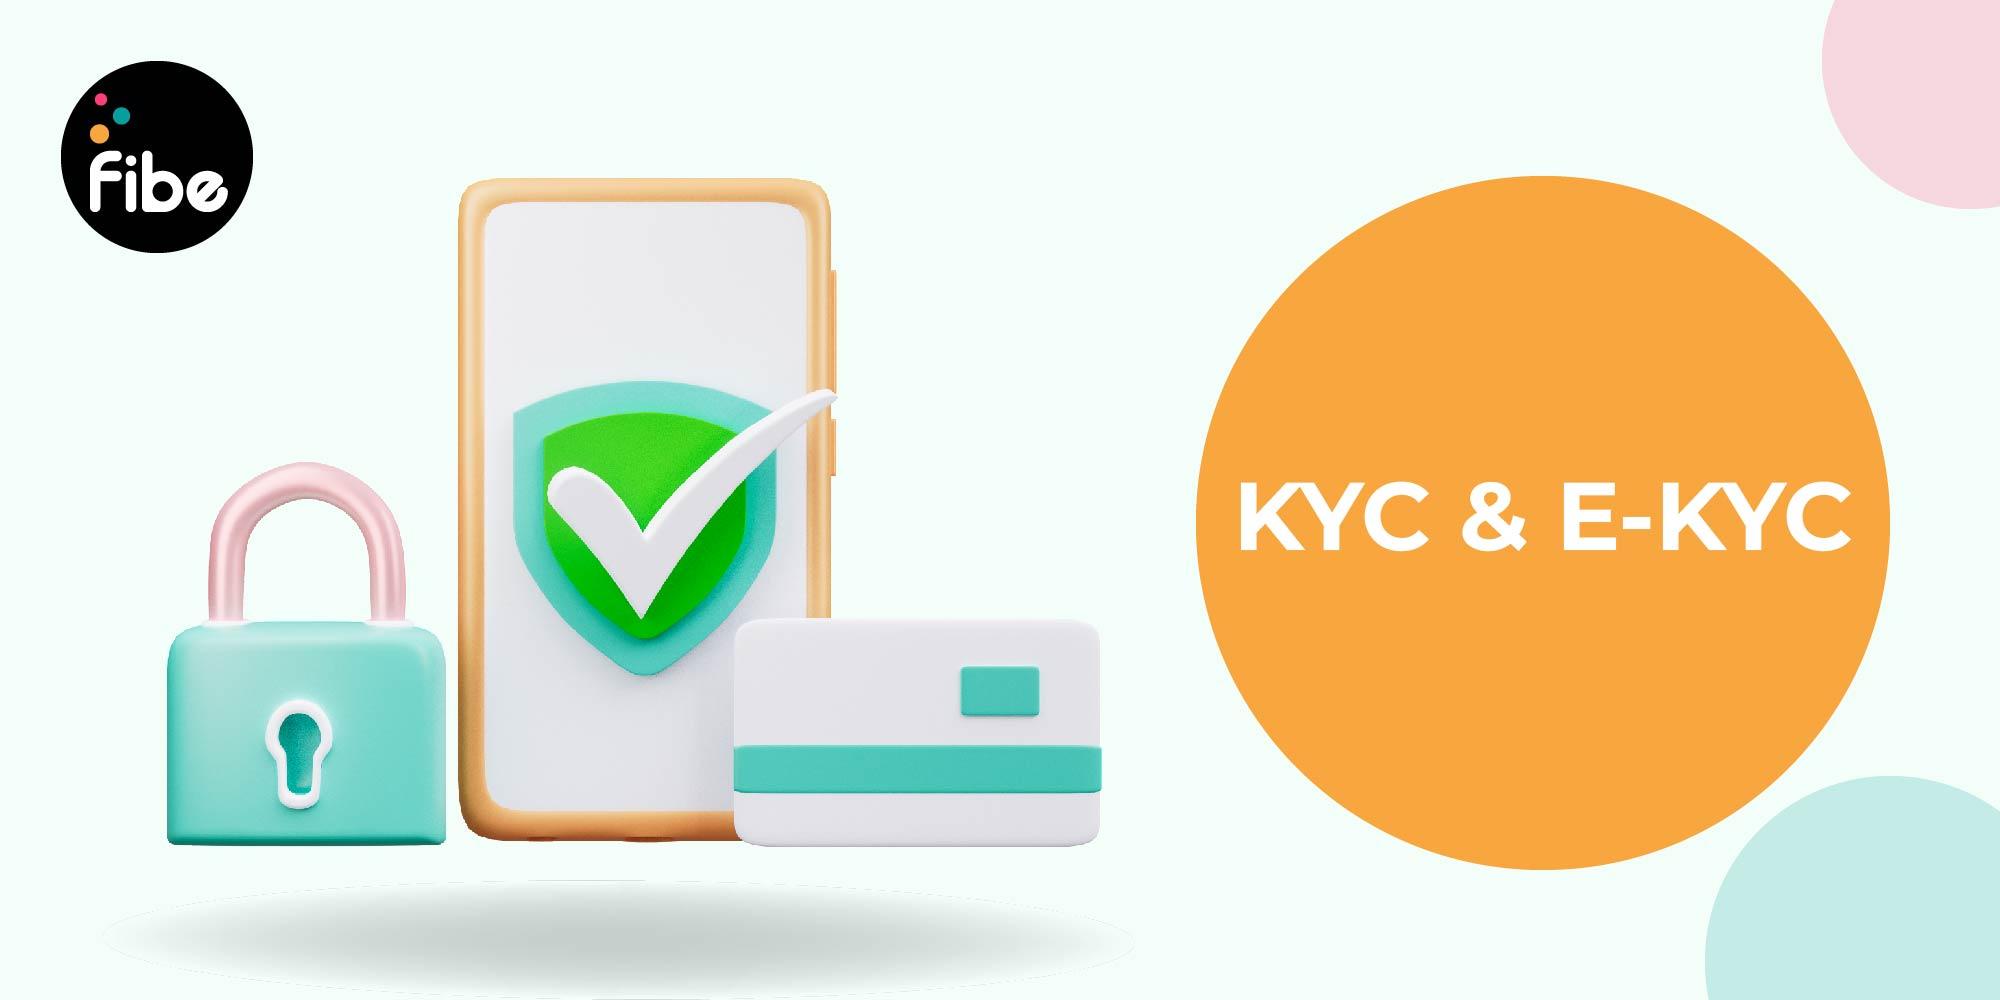 KYC, e-KYC registration and documentation: All-in-one guide